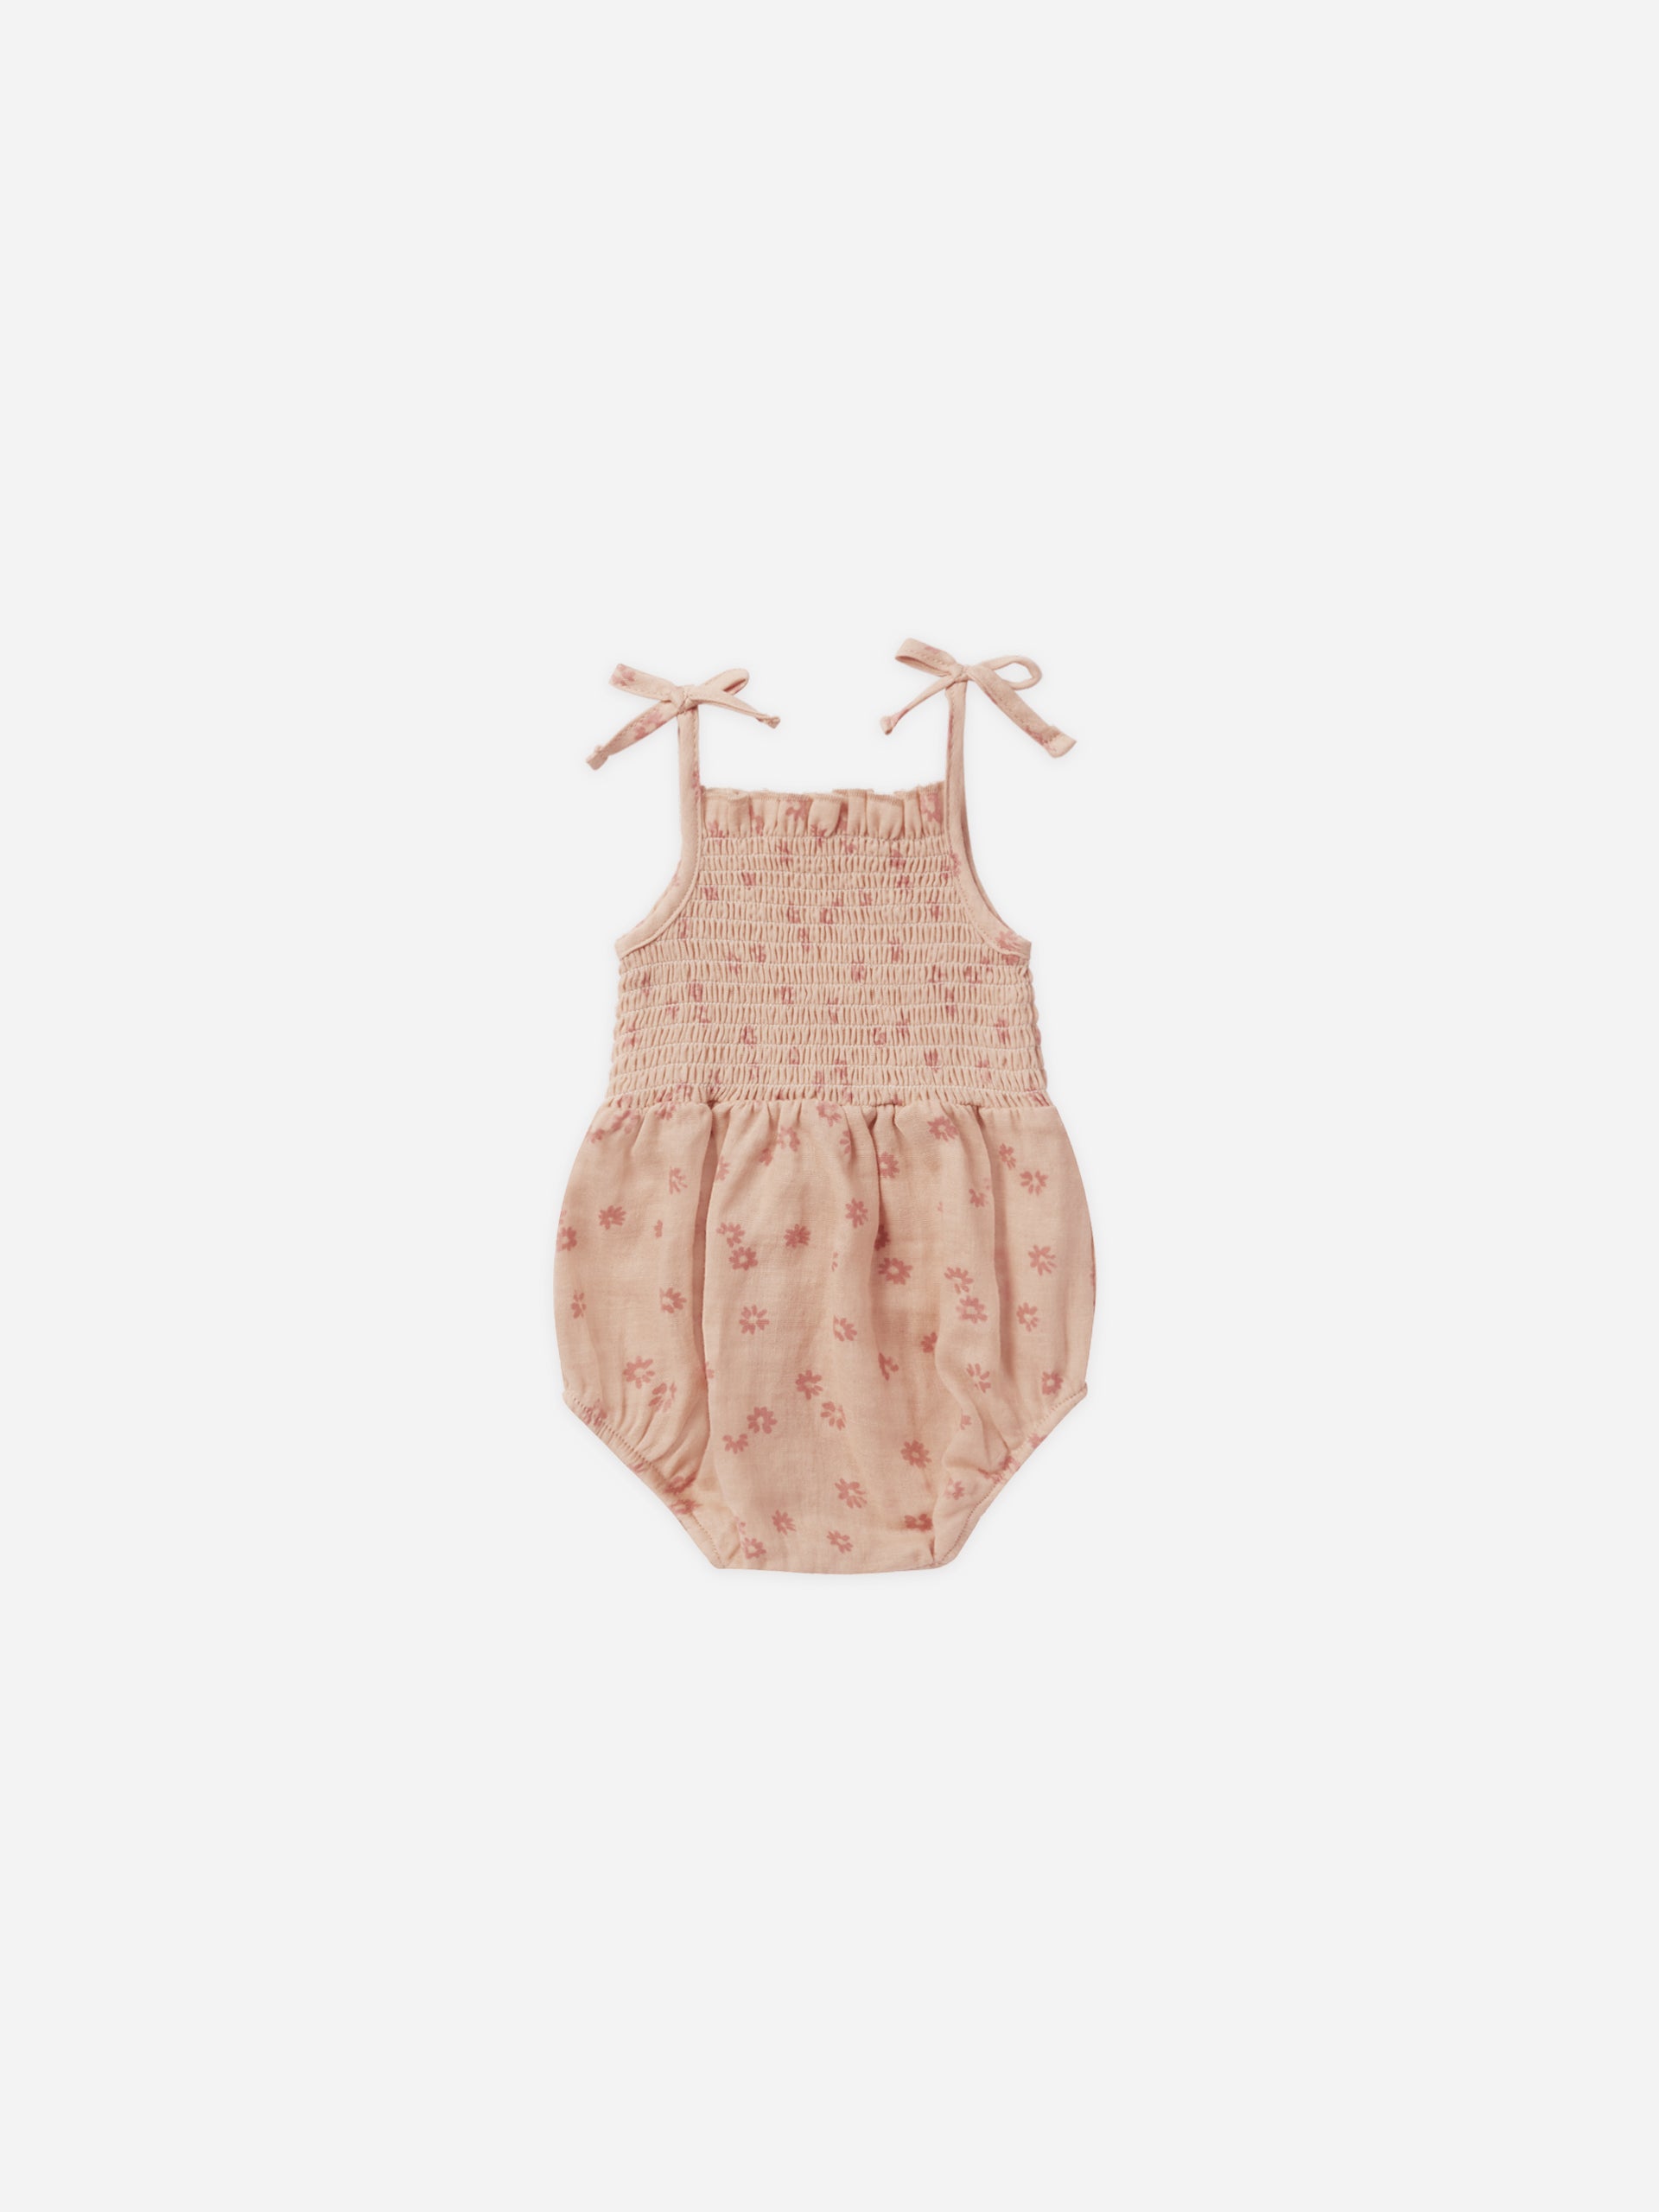 Kaia Romper || Pink Daisy - Rylee + Cru | Kids Clothes | Trendy Baby Clothes | Modern Infant Outfits |